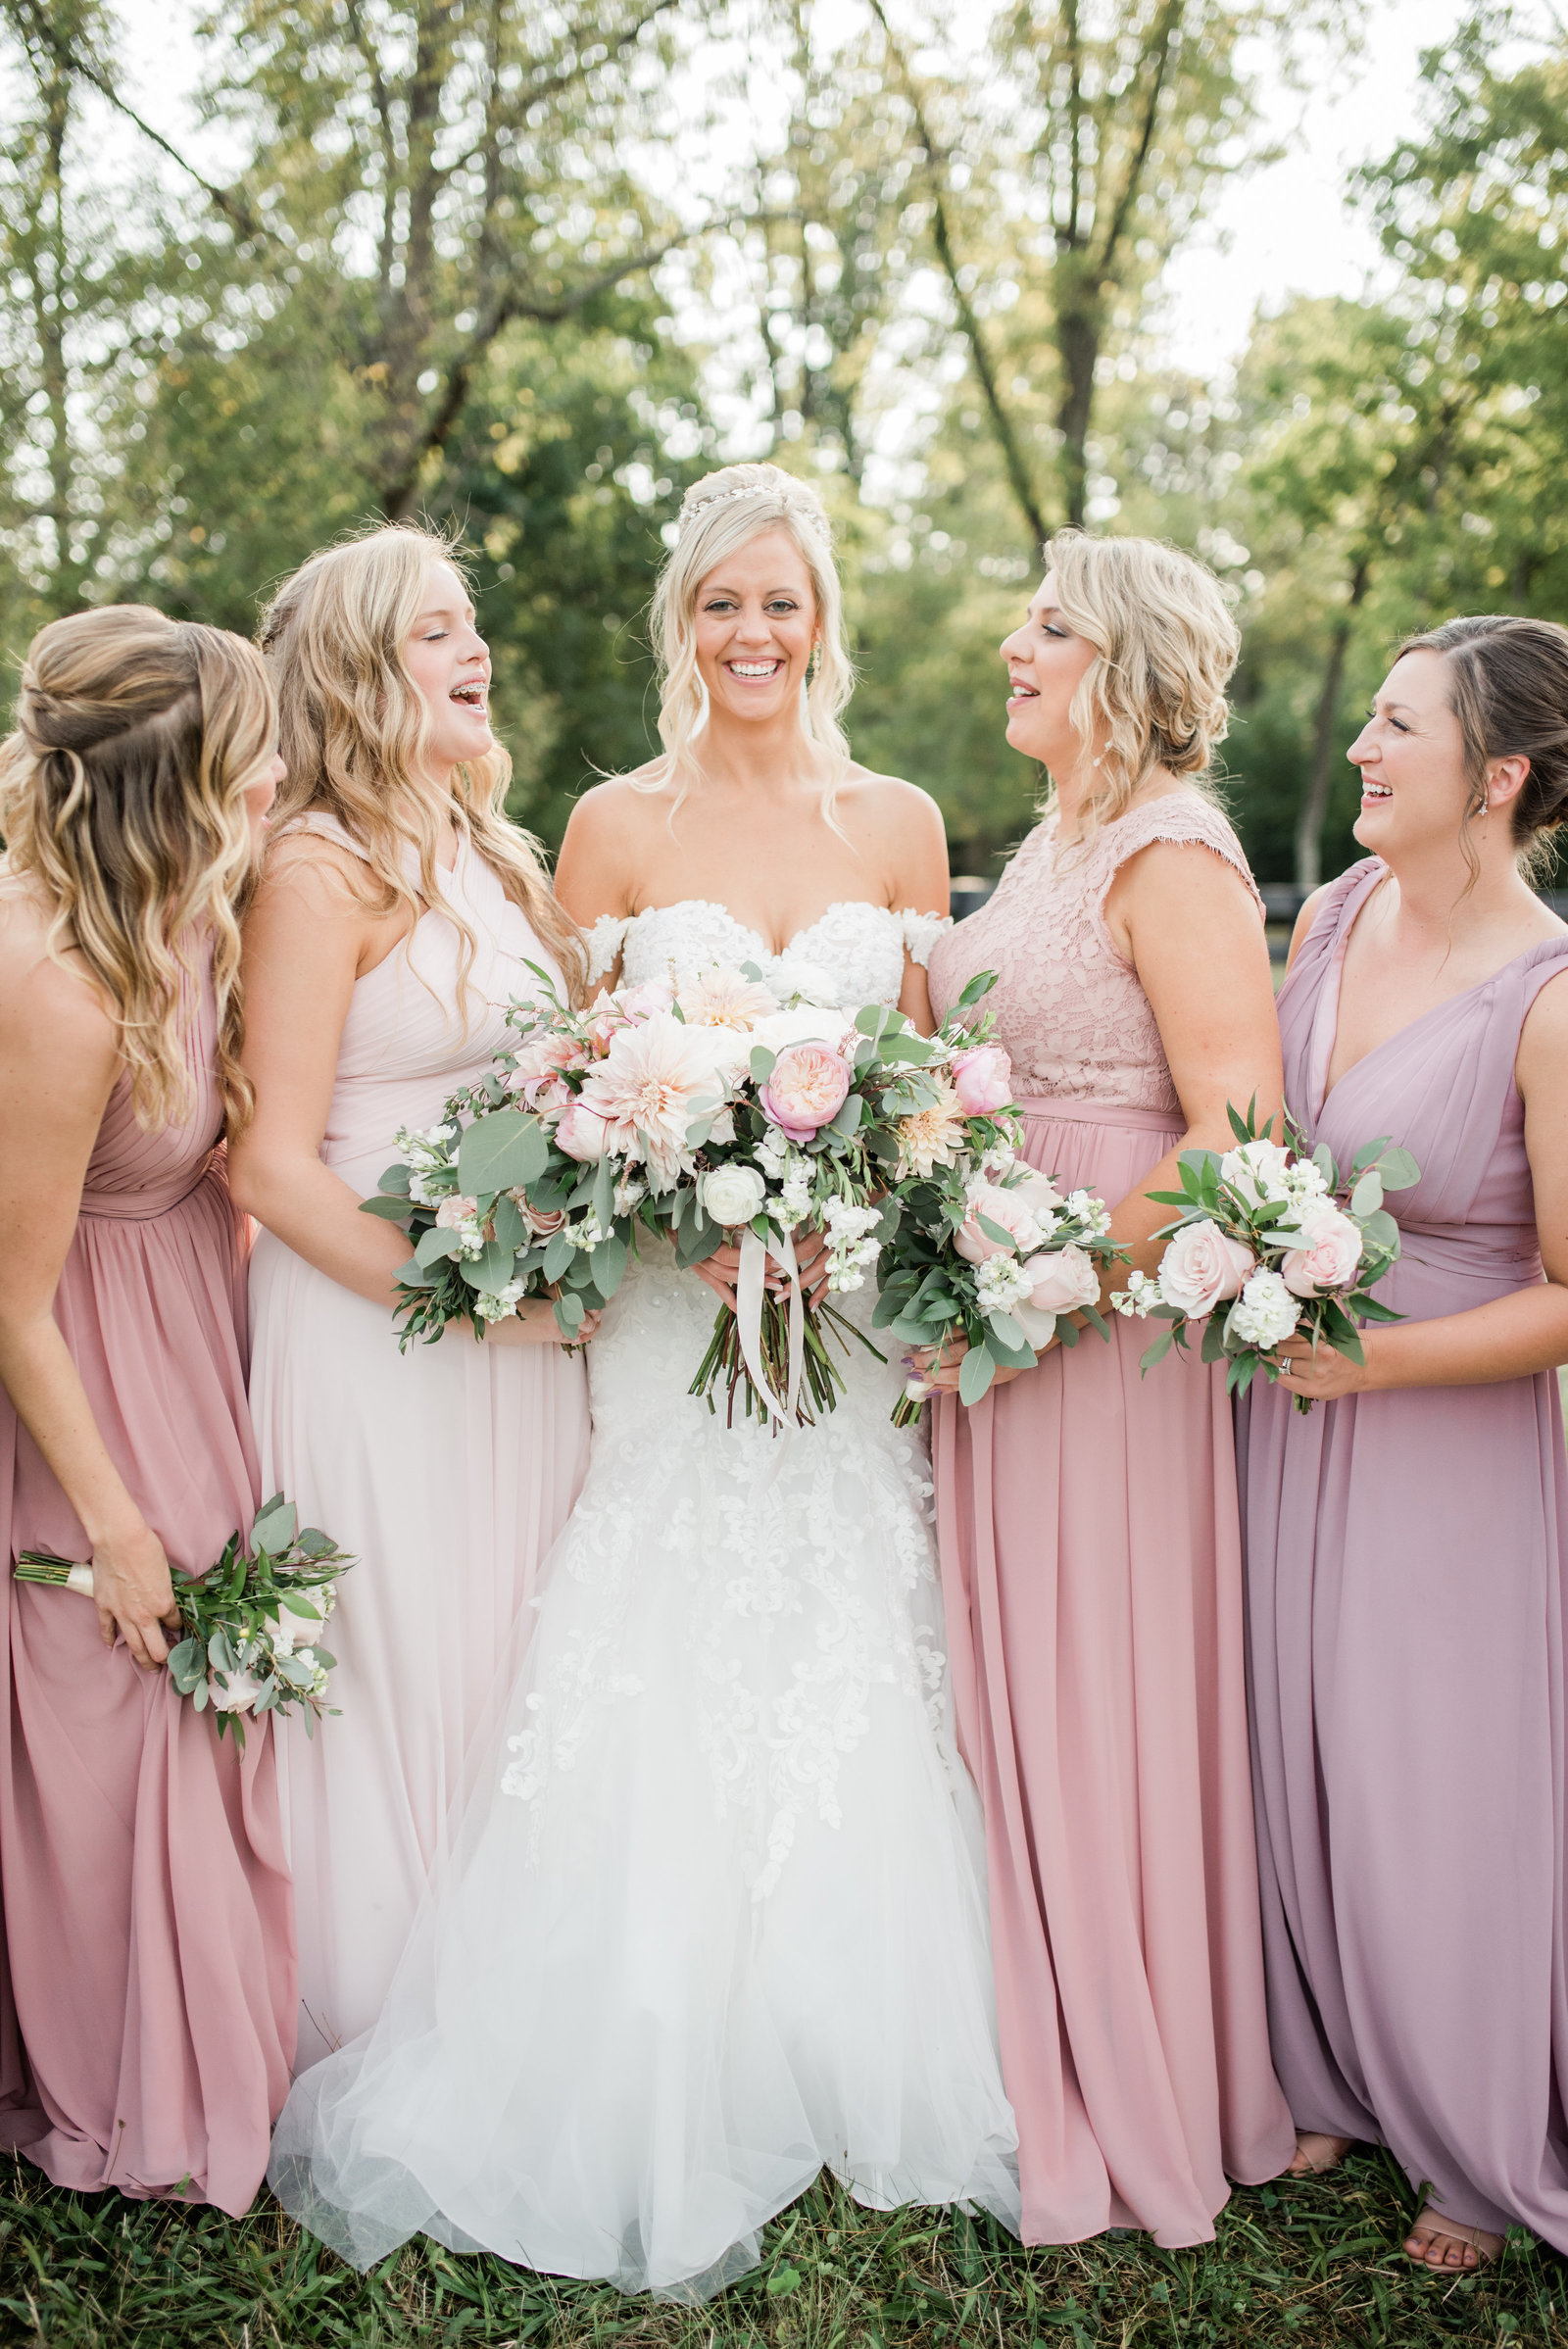 Holler_Bridal Party_106